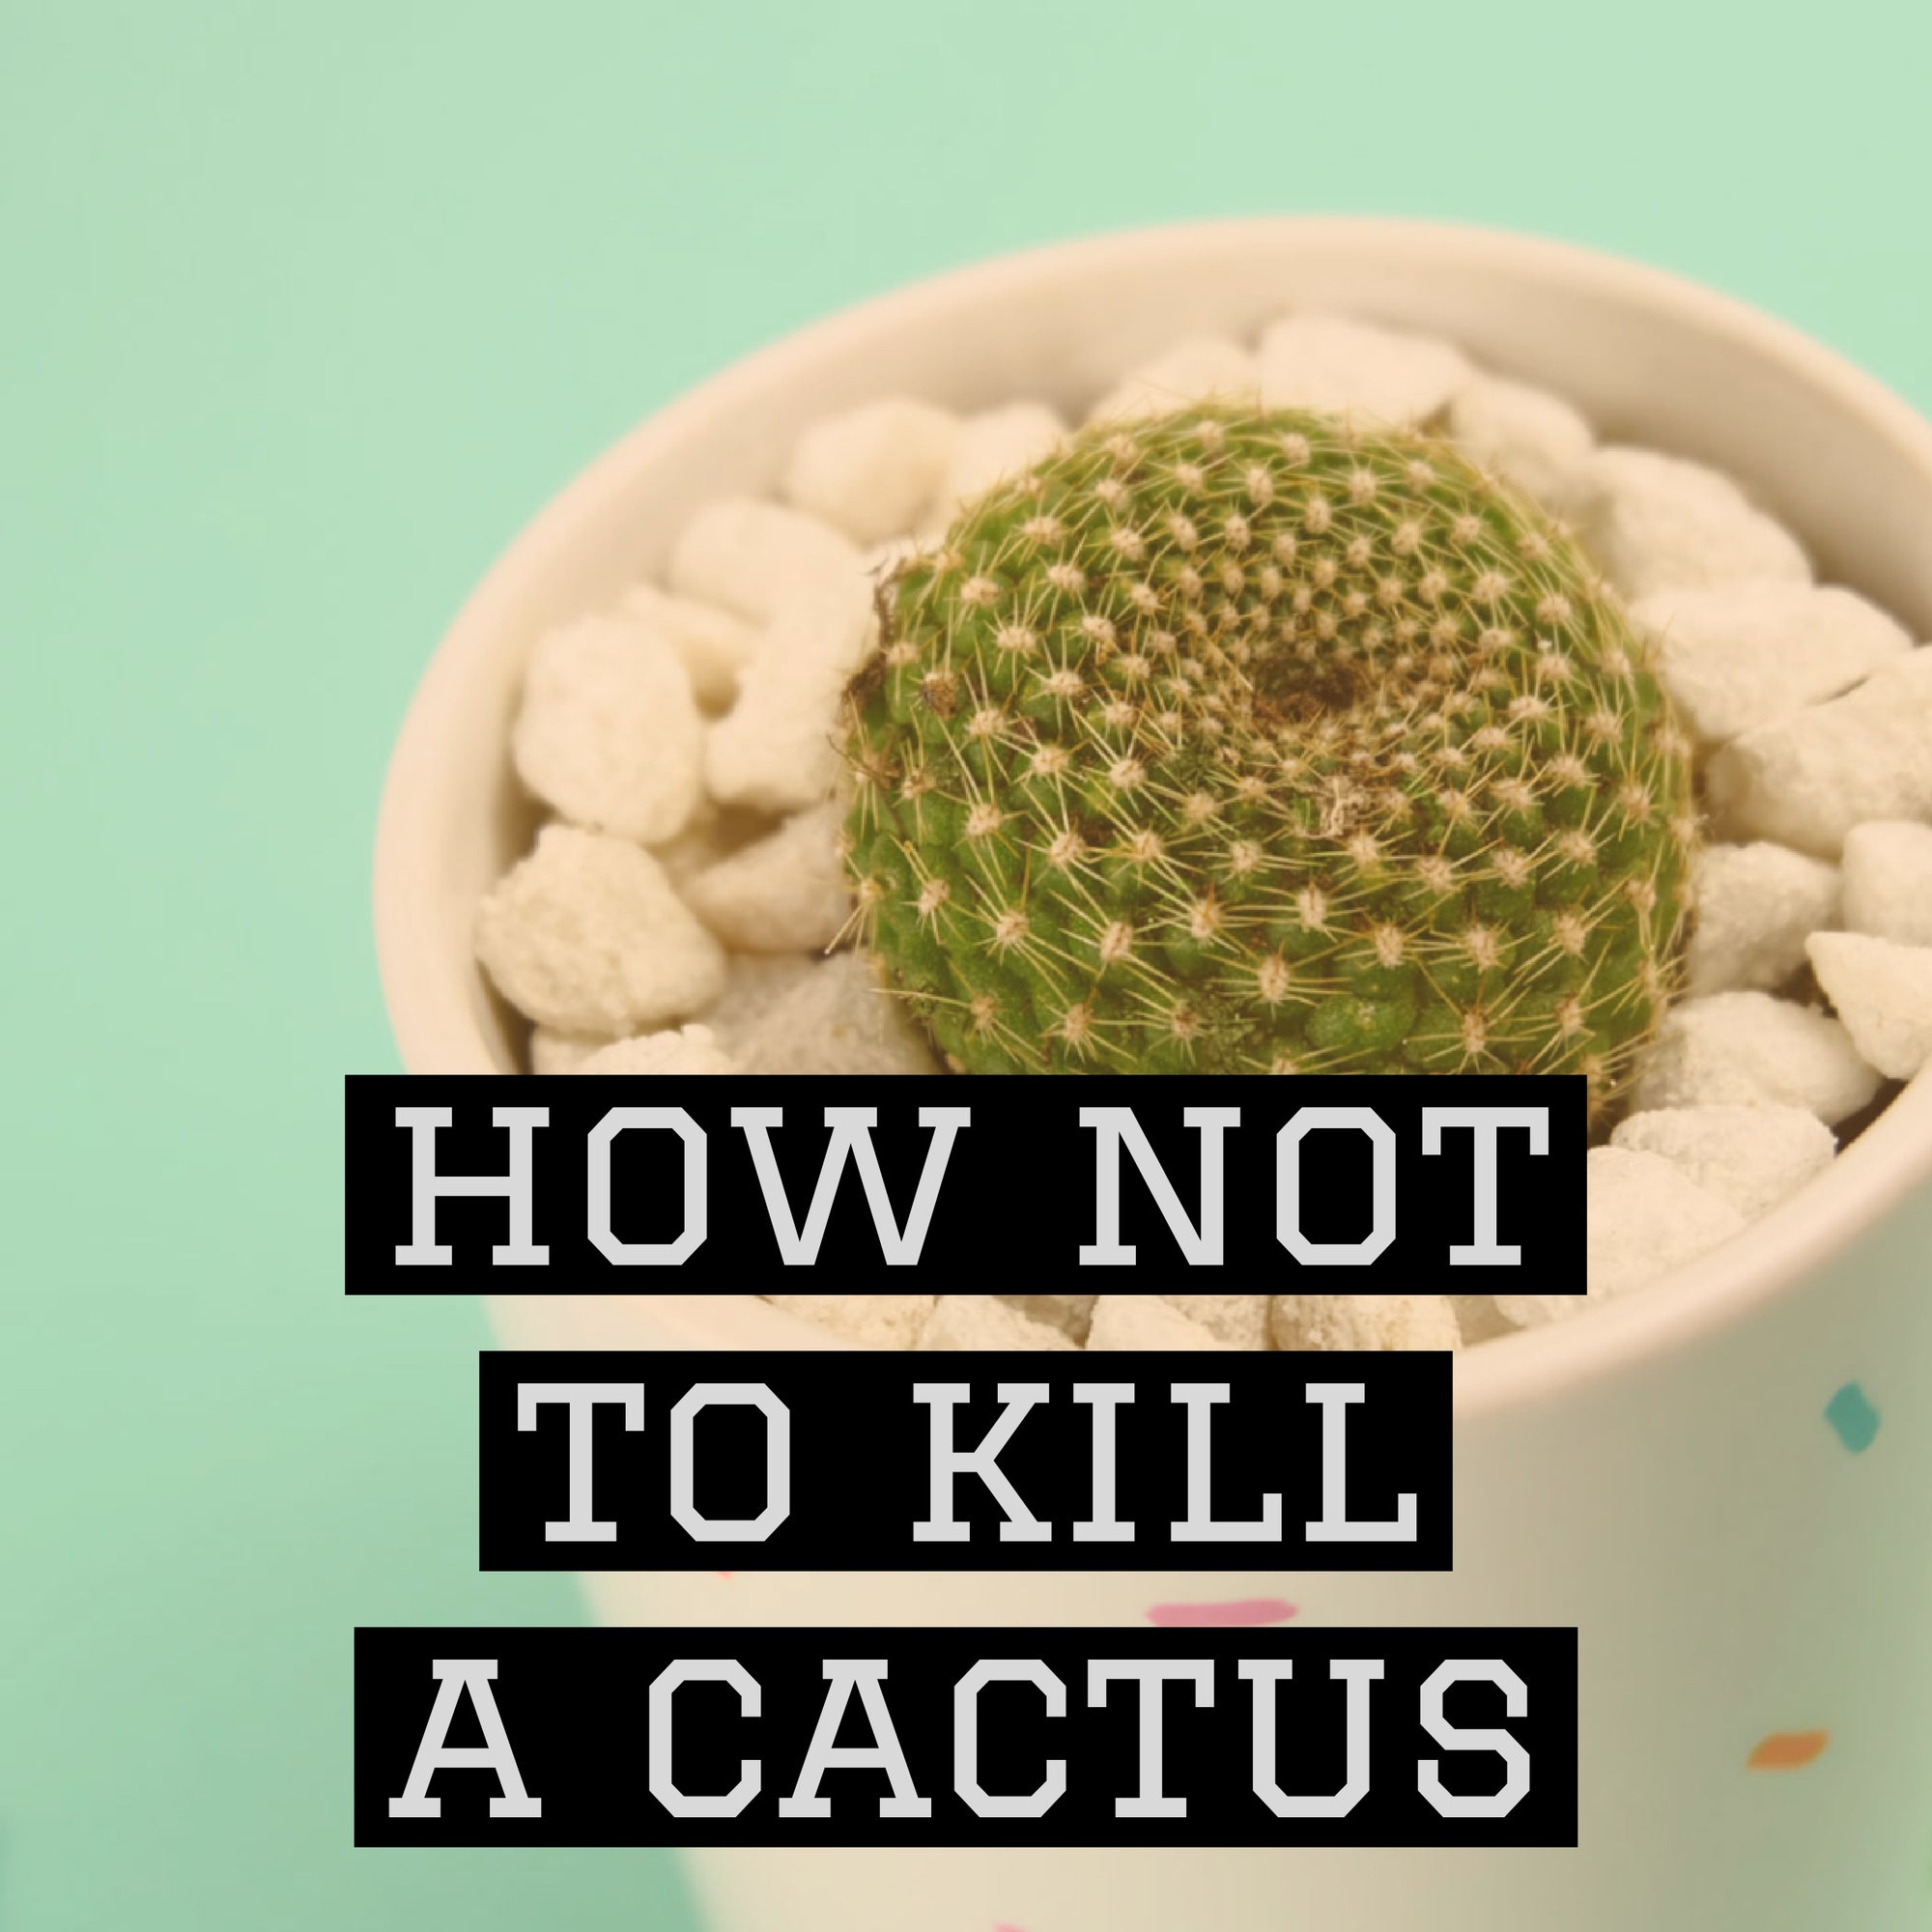 How not to kill a cactus